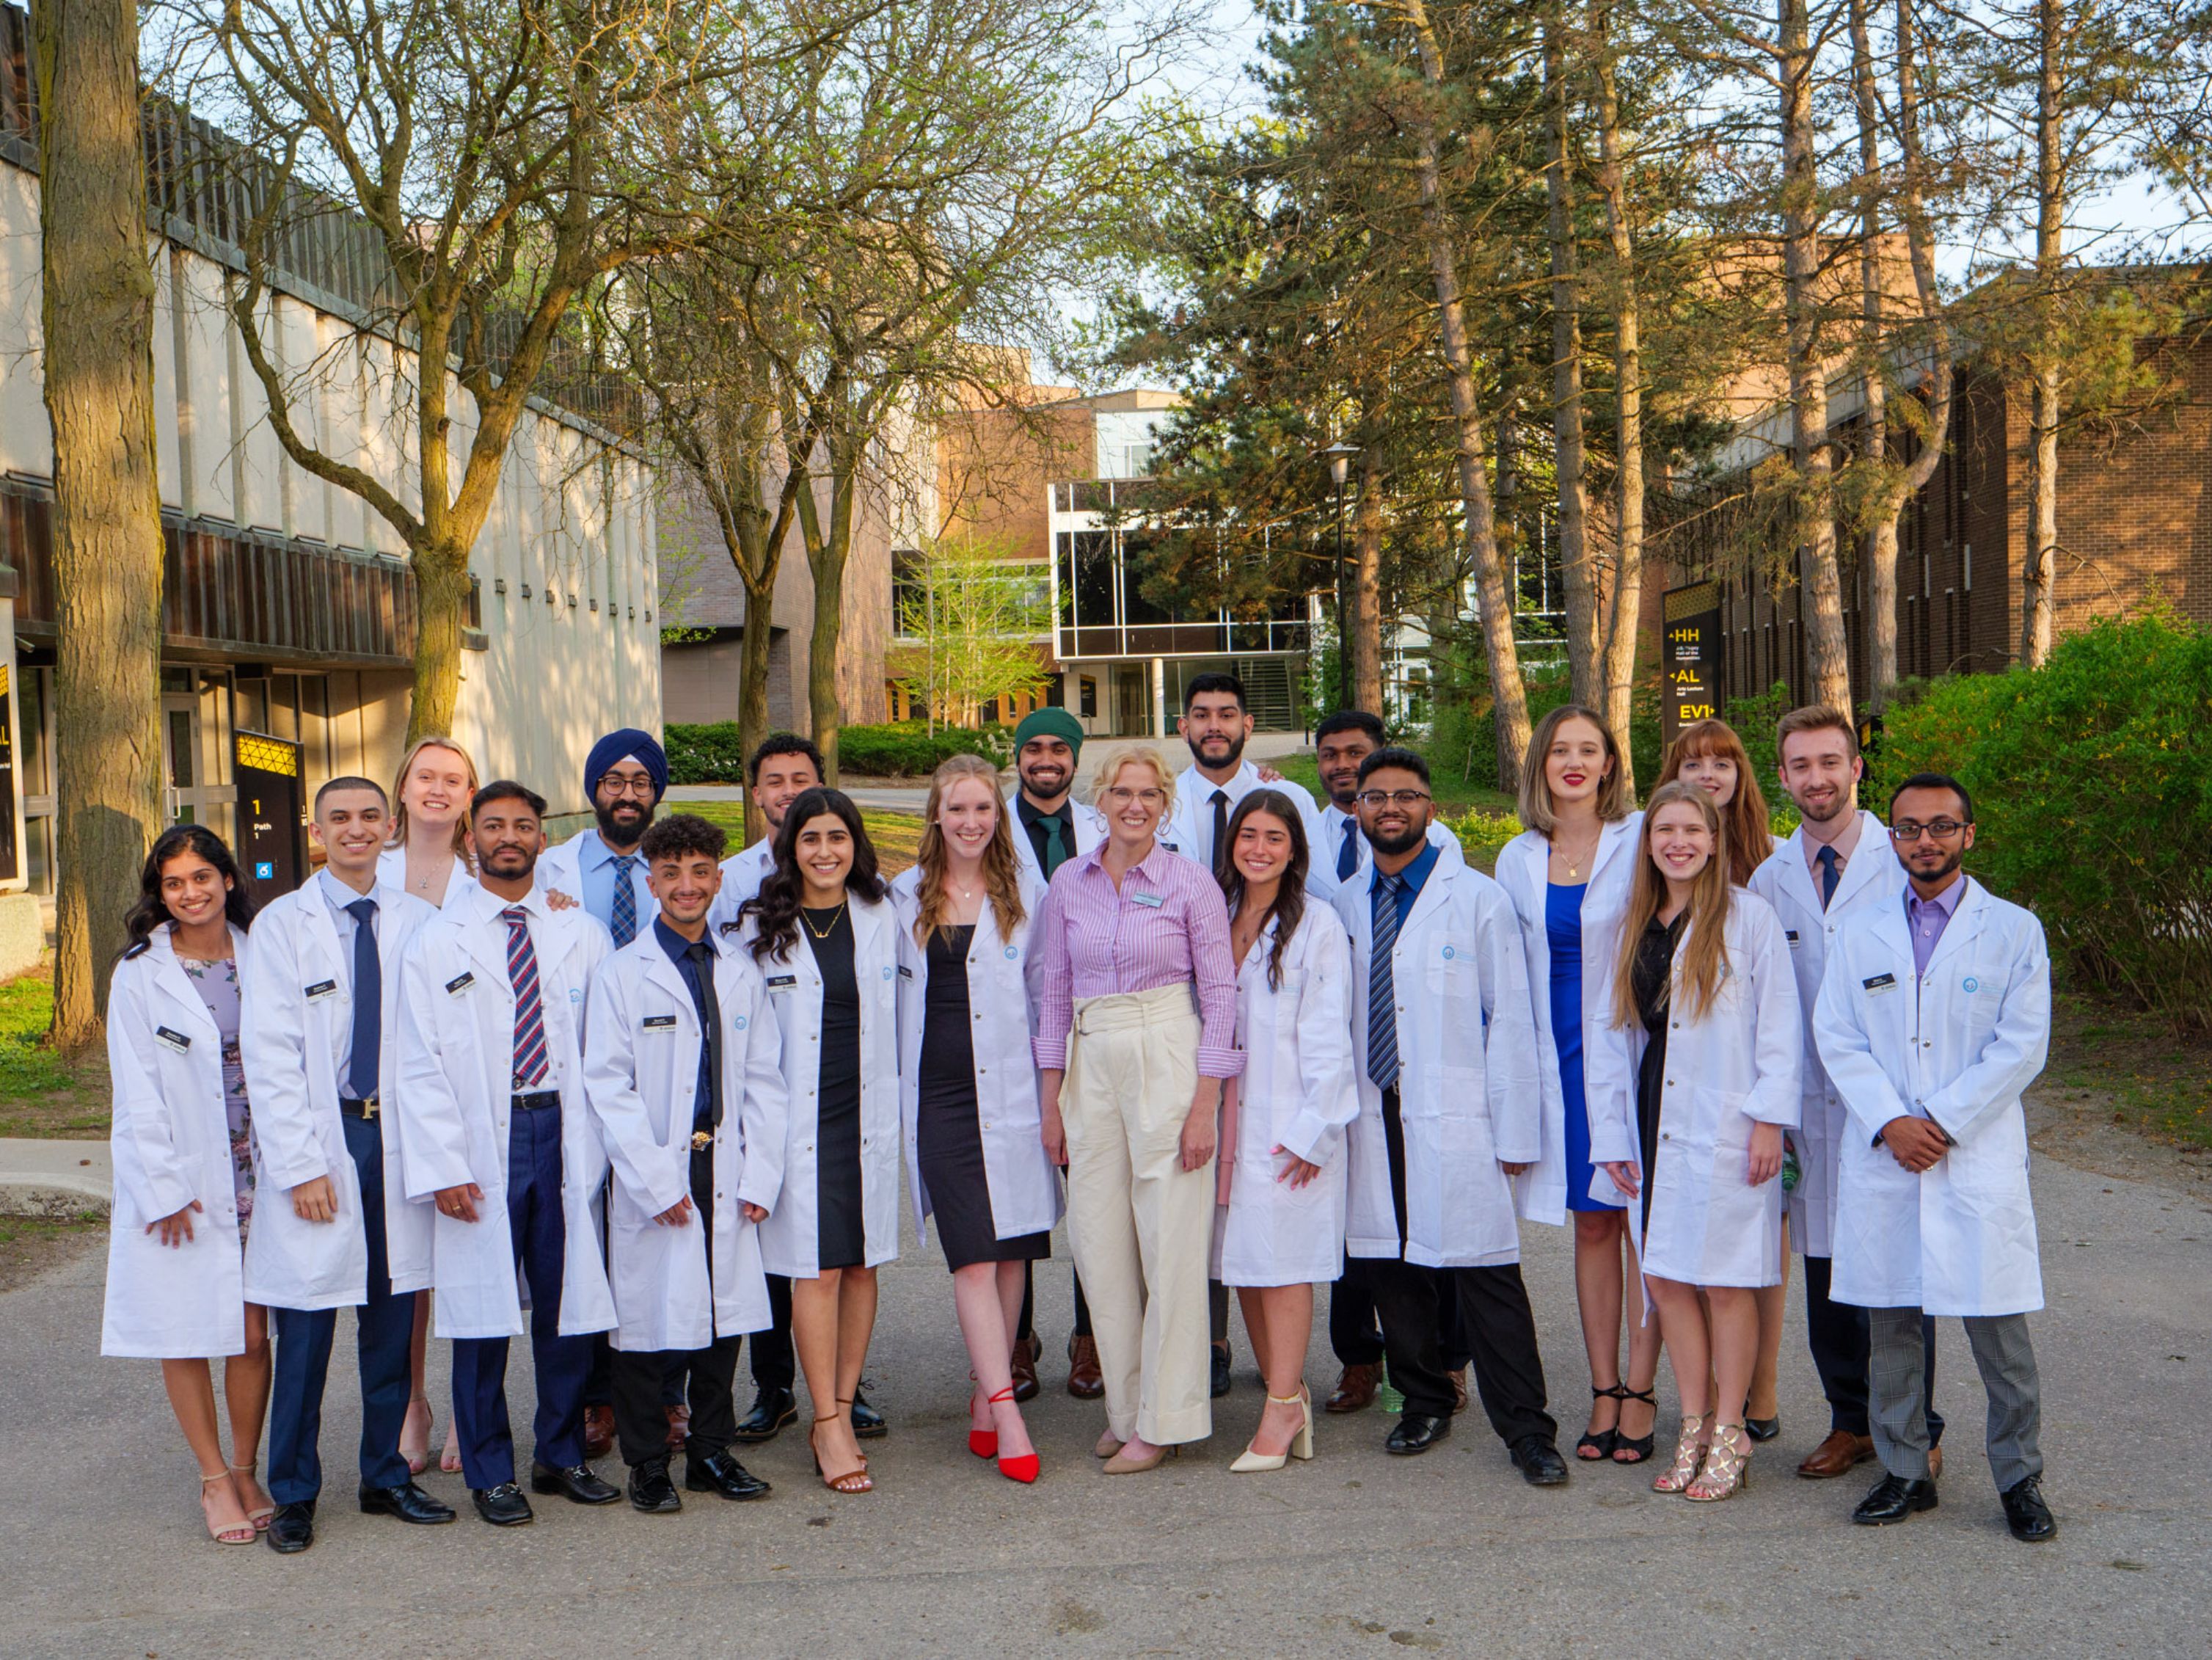 A group of people in white coats